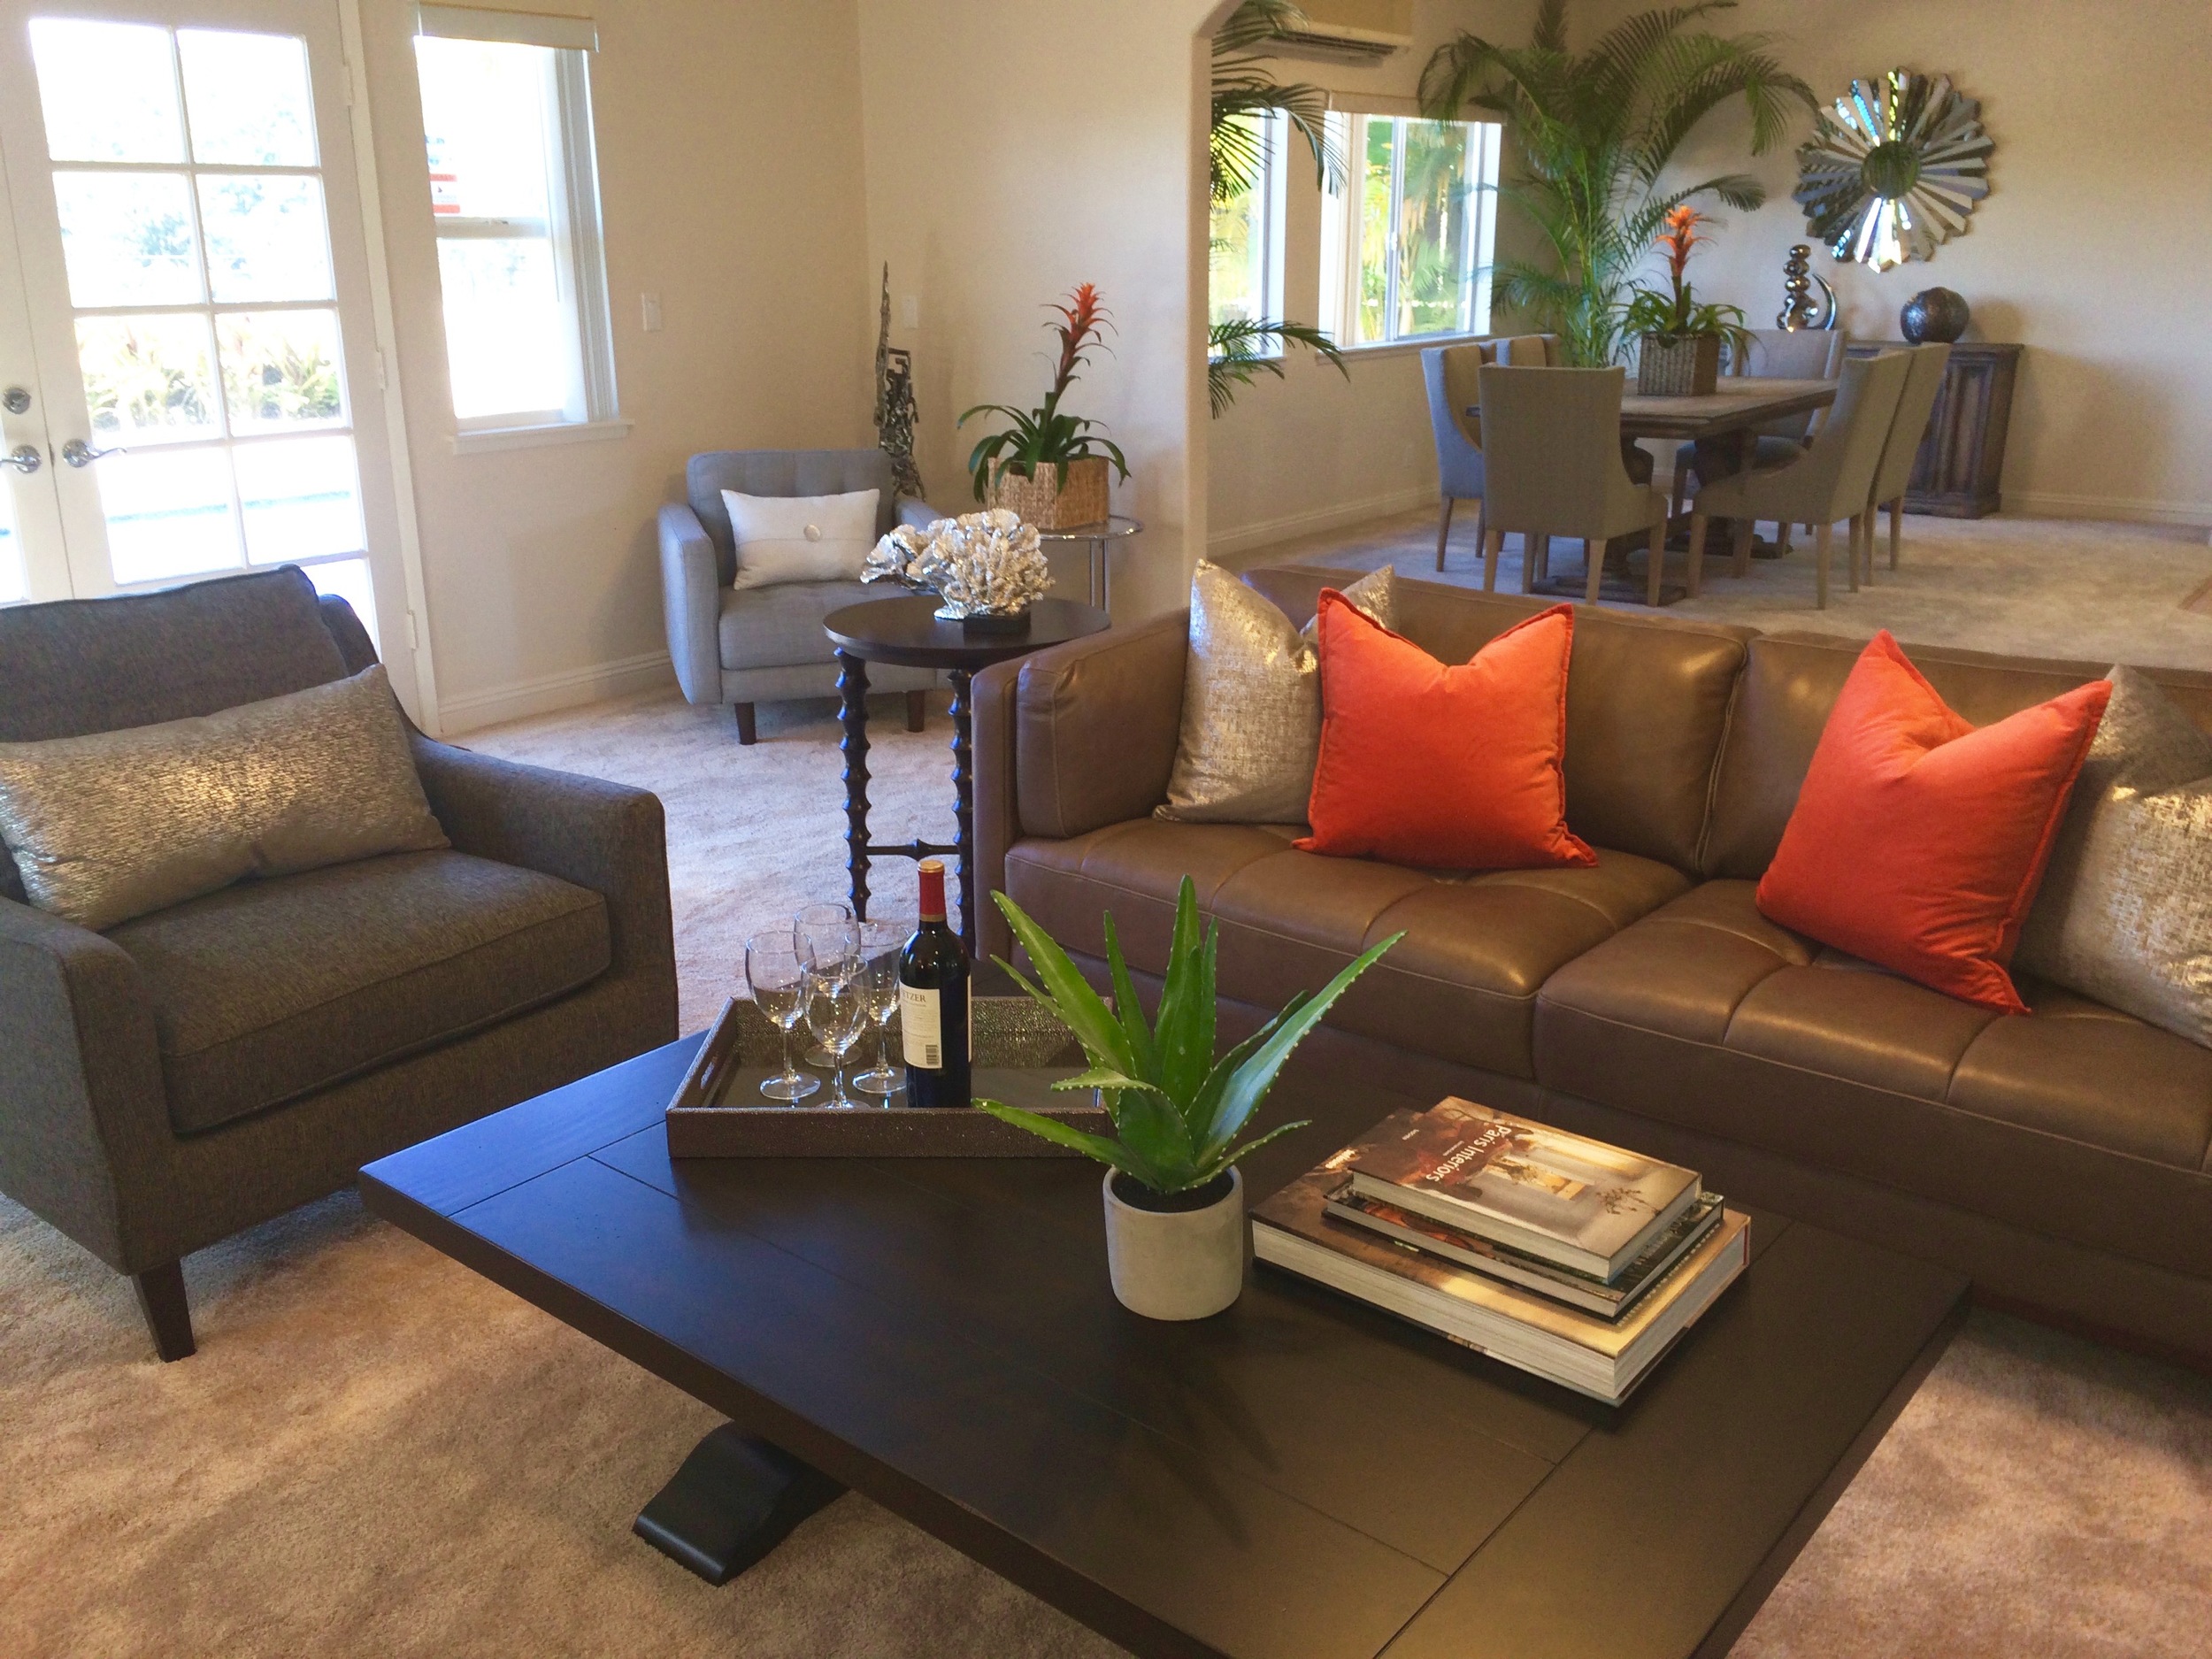 Luxury Home Staging Hawaii, Home Staging Hawaii, Inouye Interiors LLC,Best Home Stagers Hawaii, Home Stagers in Hawaii, Stagers Hawaii, Home Stager Hawaii, Luxury Home Stager Hawaii